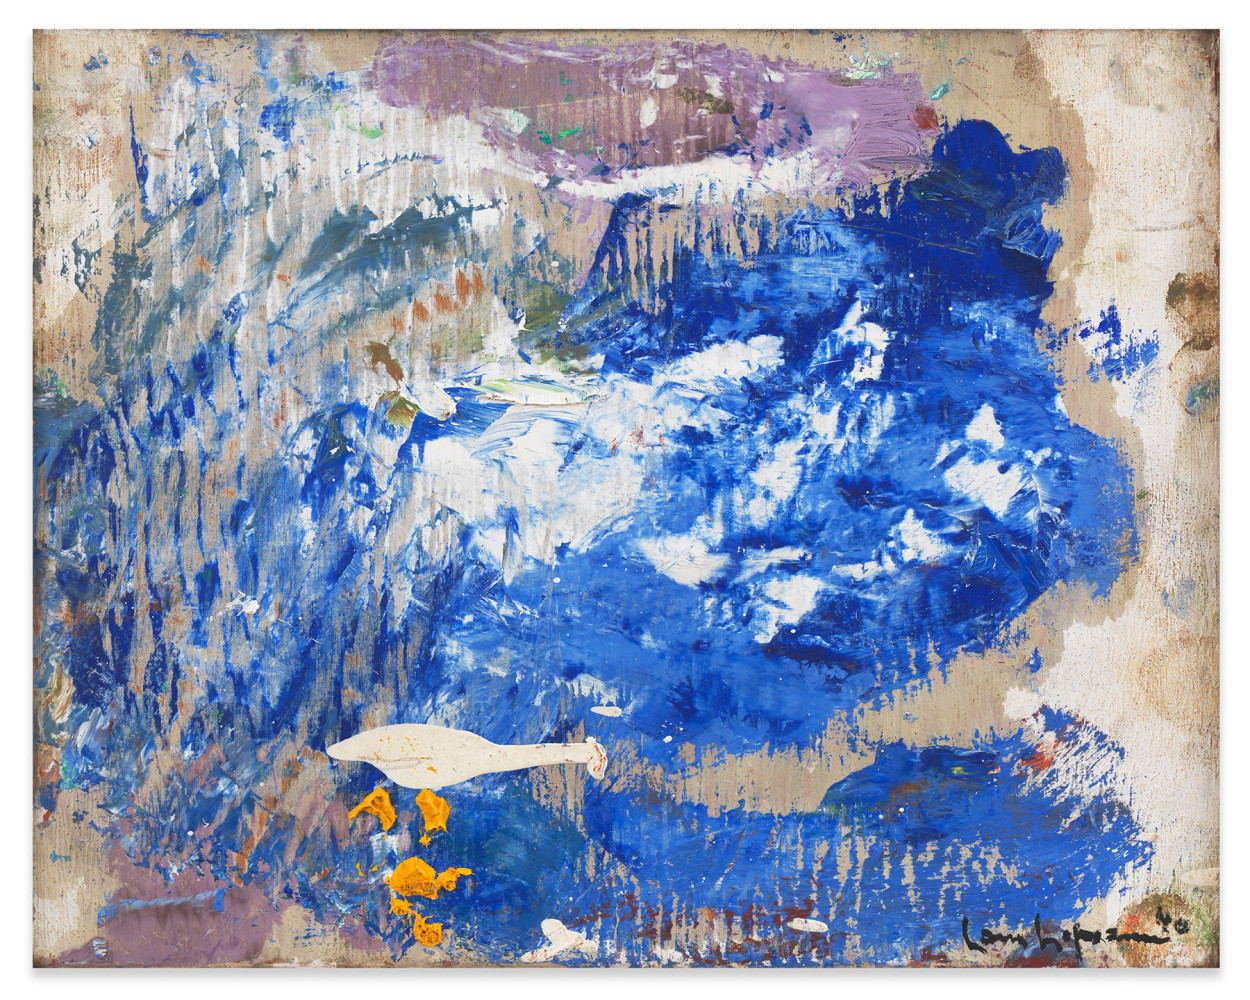 Hans Hofmann

Submerged, 1940

Oil on panel

7 3/4h x 9 3/4w in

HH040